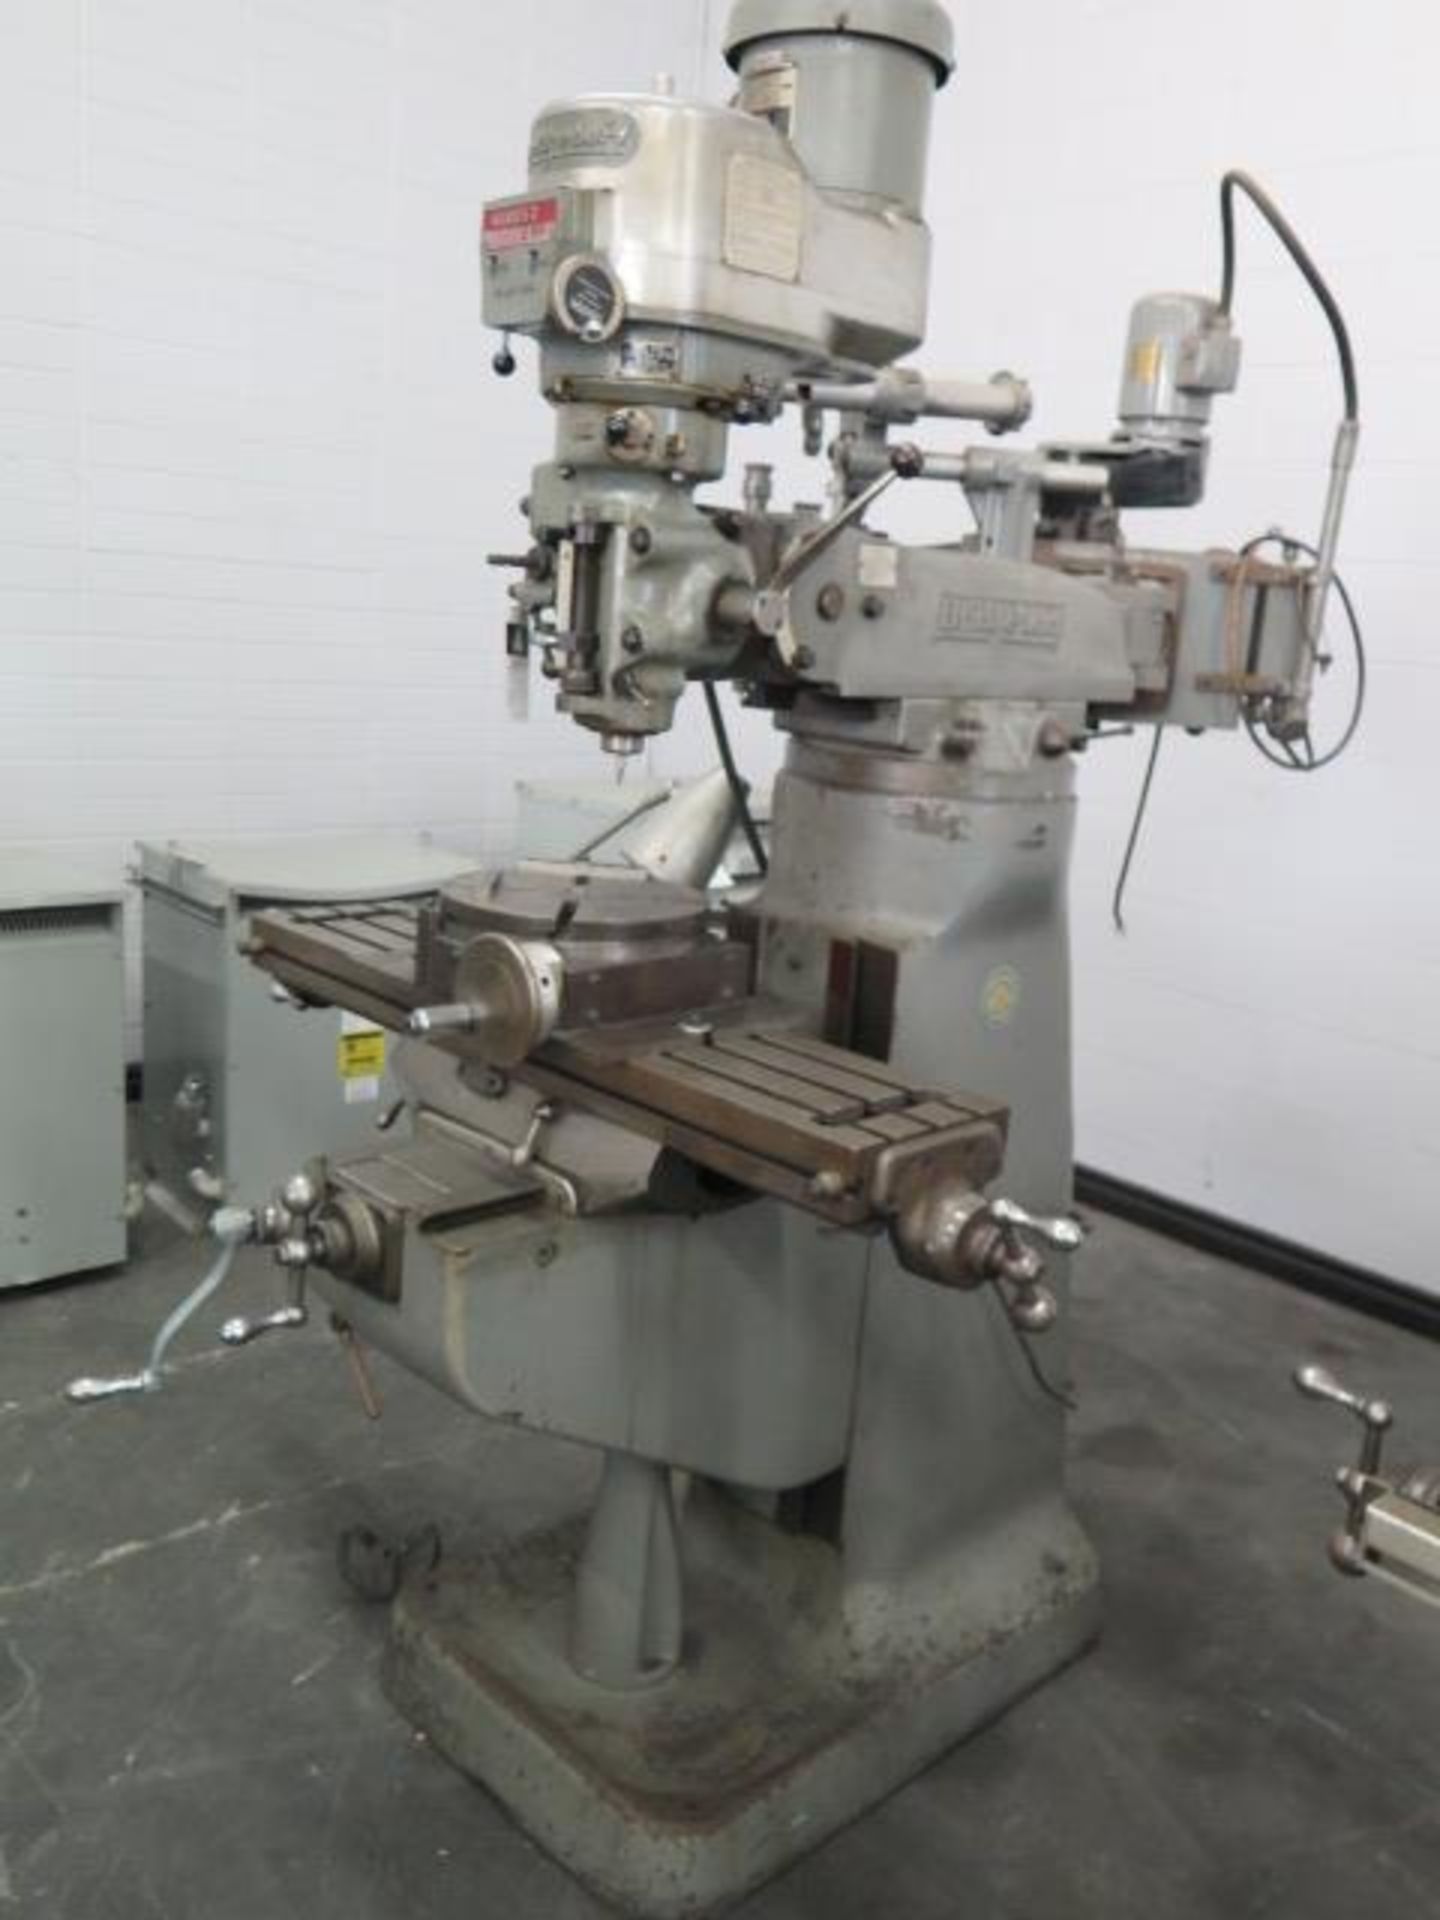 Bridgeport Series 1 - 2Hp Vertical Mill s/n 176483 w/ 60-4200 Dial RPM, 9" x 42" Table, SOLD AS IS - Image 2 of 17